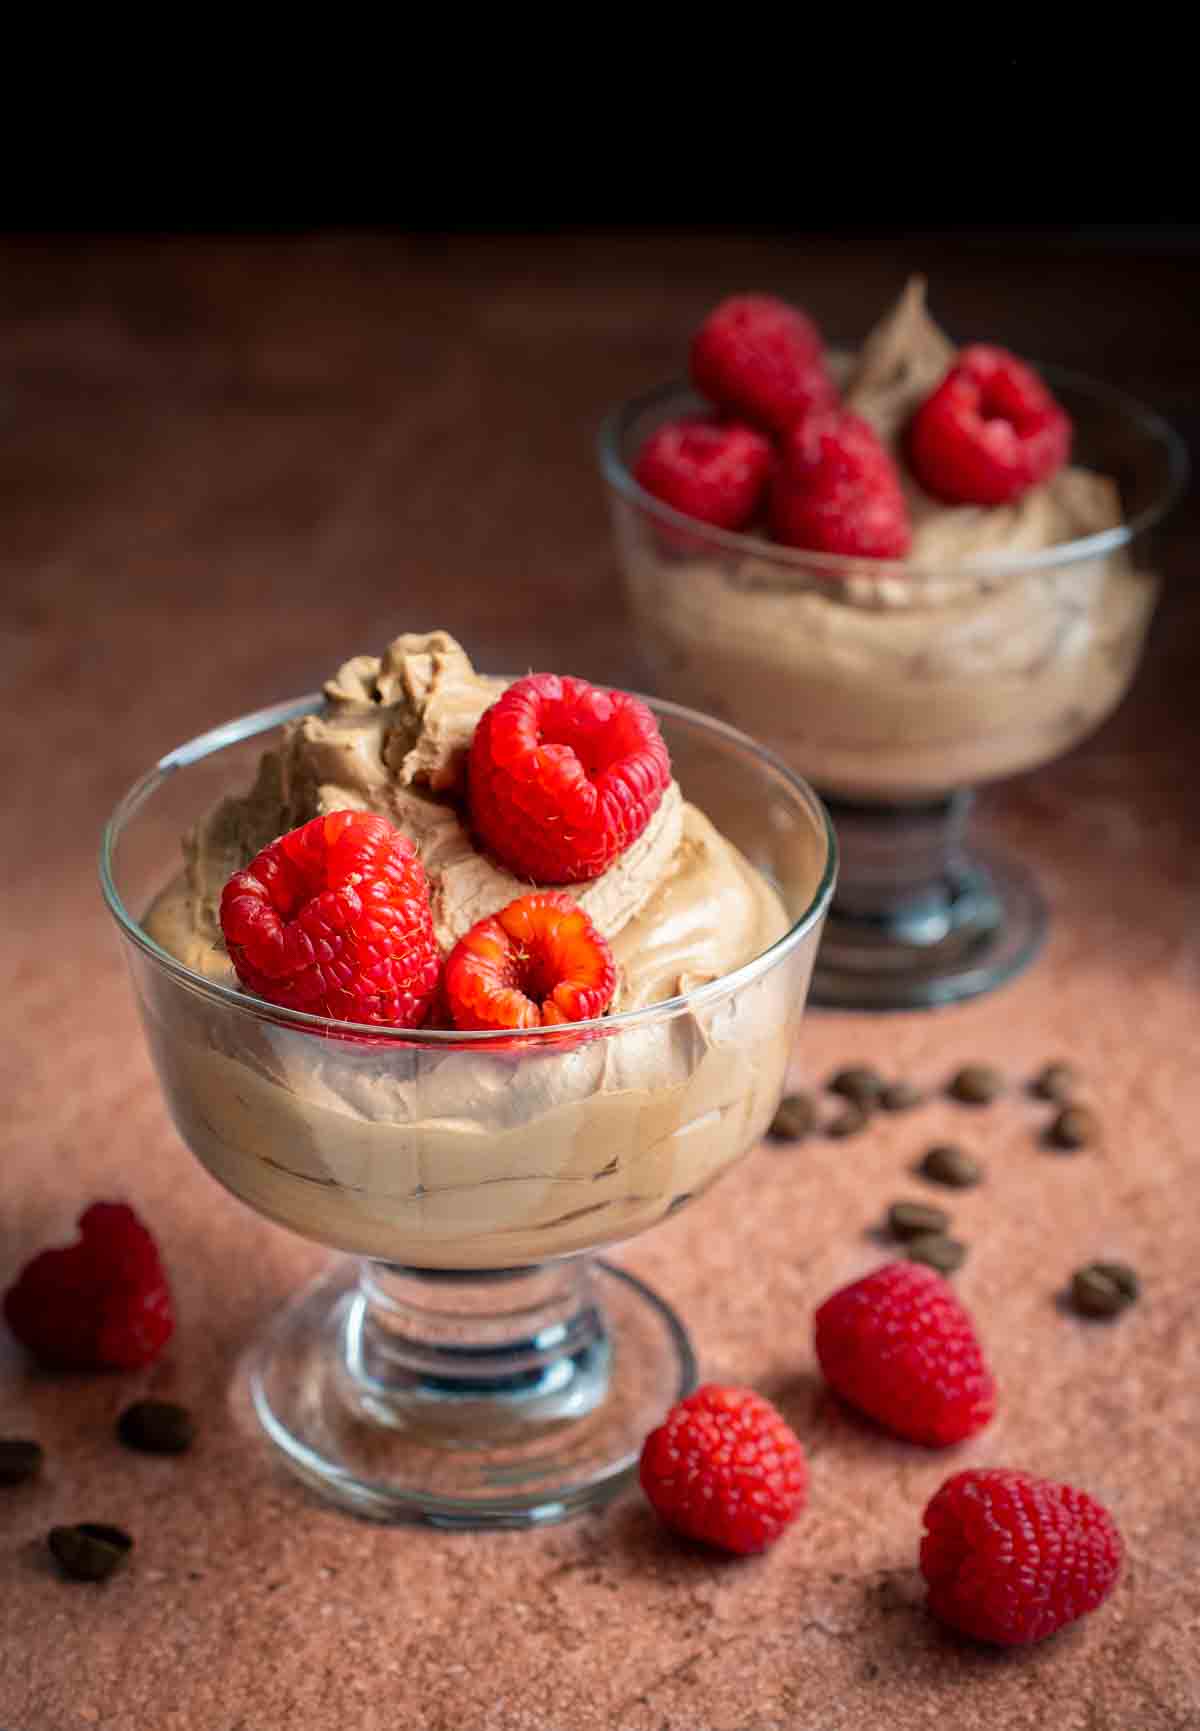 <p>This delectable 3-ingredient coffee mousse dessert recipe is creamy, smooth, and fluffy with a rich, bold flavor.</p> <p><strong>Go to the recipe</strong>: <strong><a href="https://thecinnamonjar.com/3-ingredient-coffee-mousse/">3-Ingredient Coffee Mousse</a></strong></p>